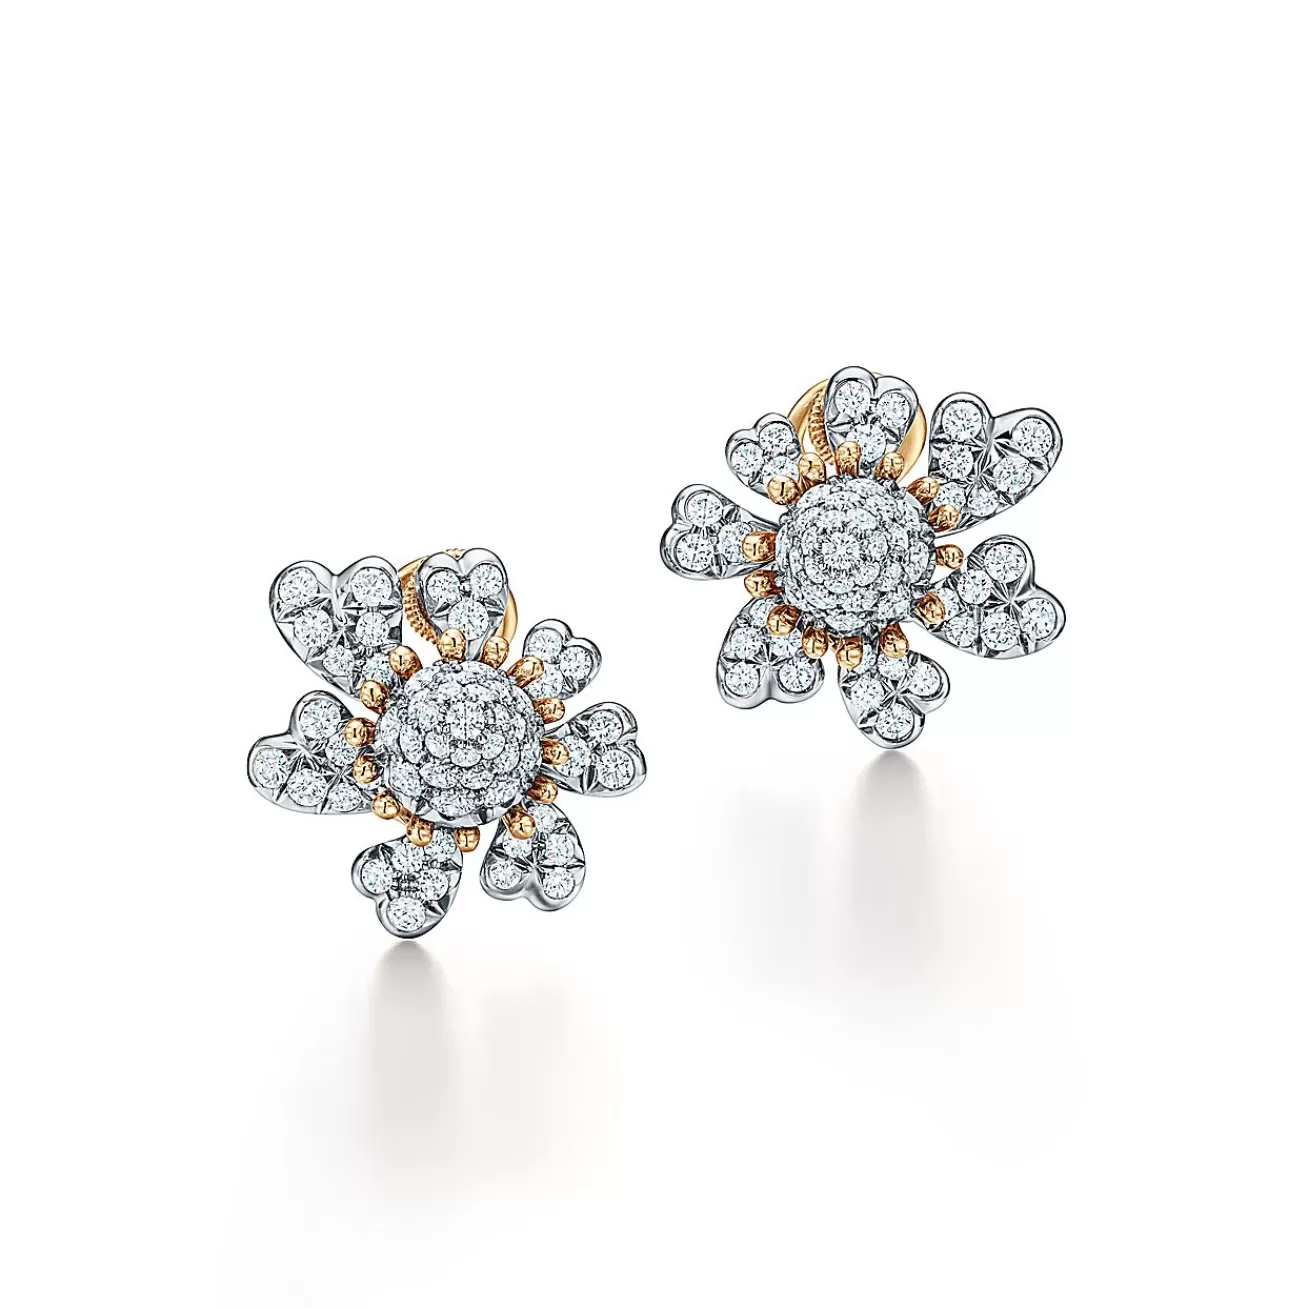 Tiffany & Co. Schlumberger® Cones with Petals Ear Clips in Platinum and Gold | ^ Earrings | Gold Jewelry